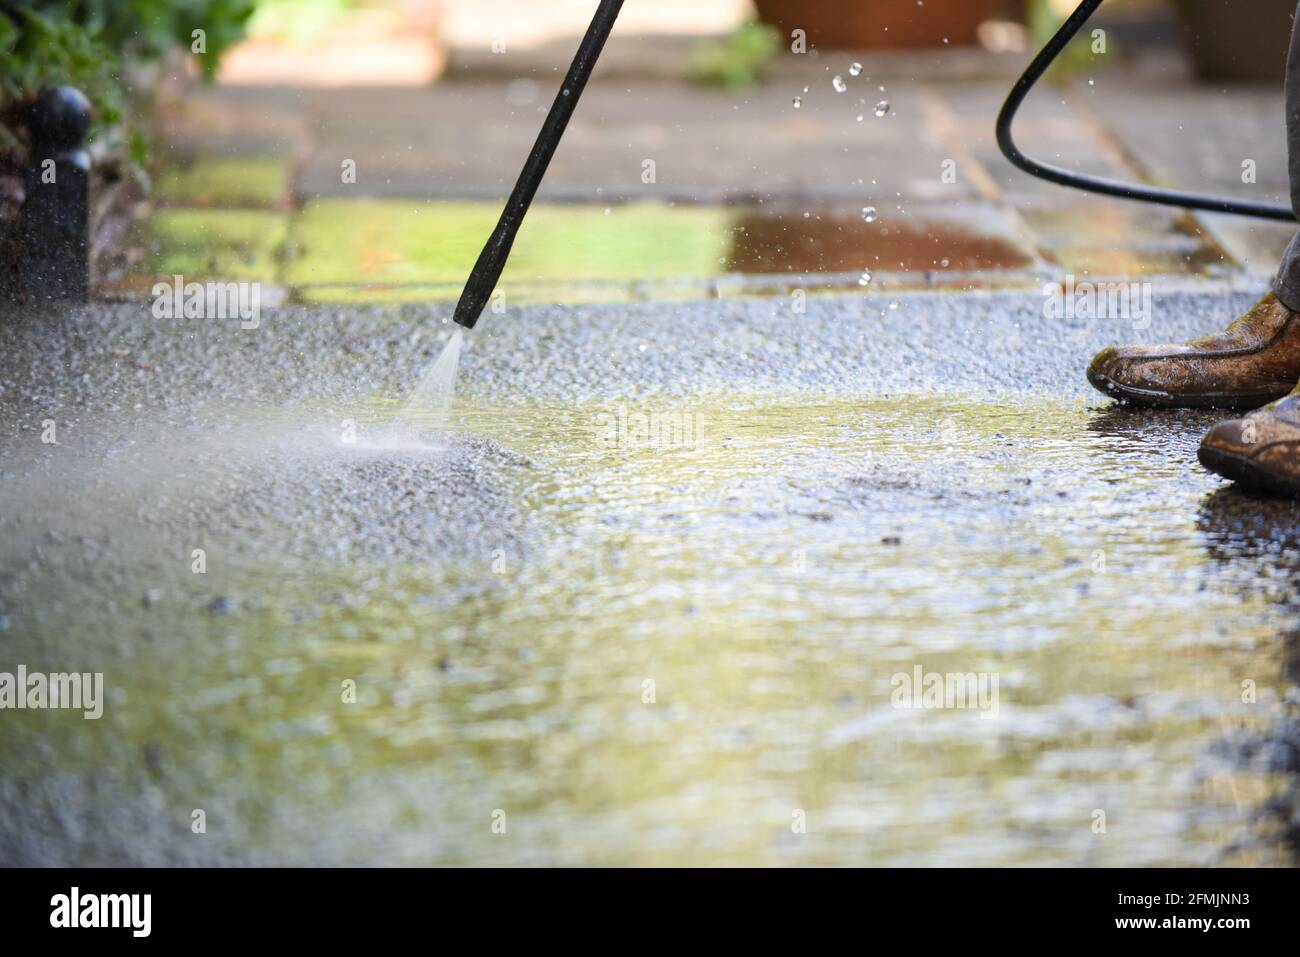 Cleaning patio paving with a high pressure washer the man is using the water to clean the garden path Stock Photo